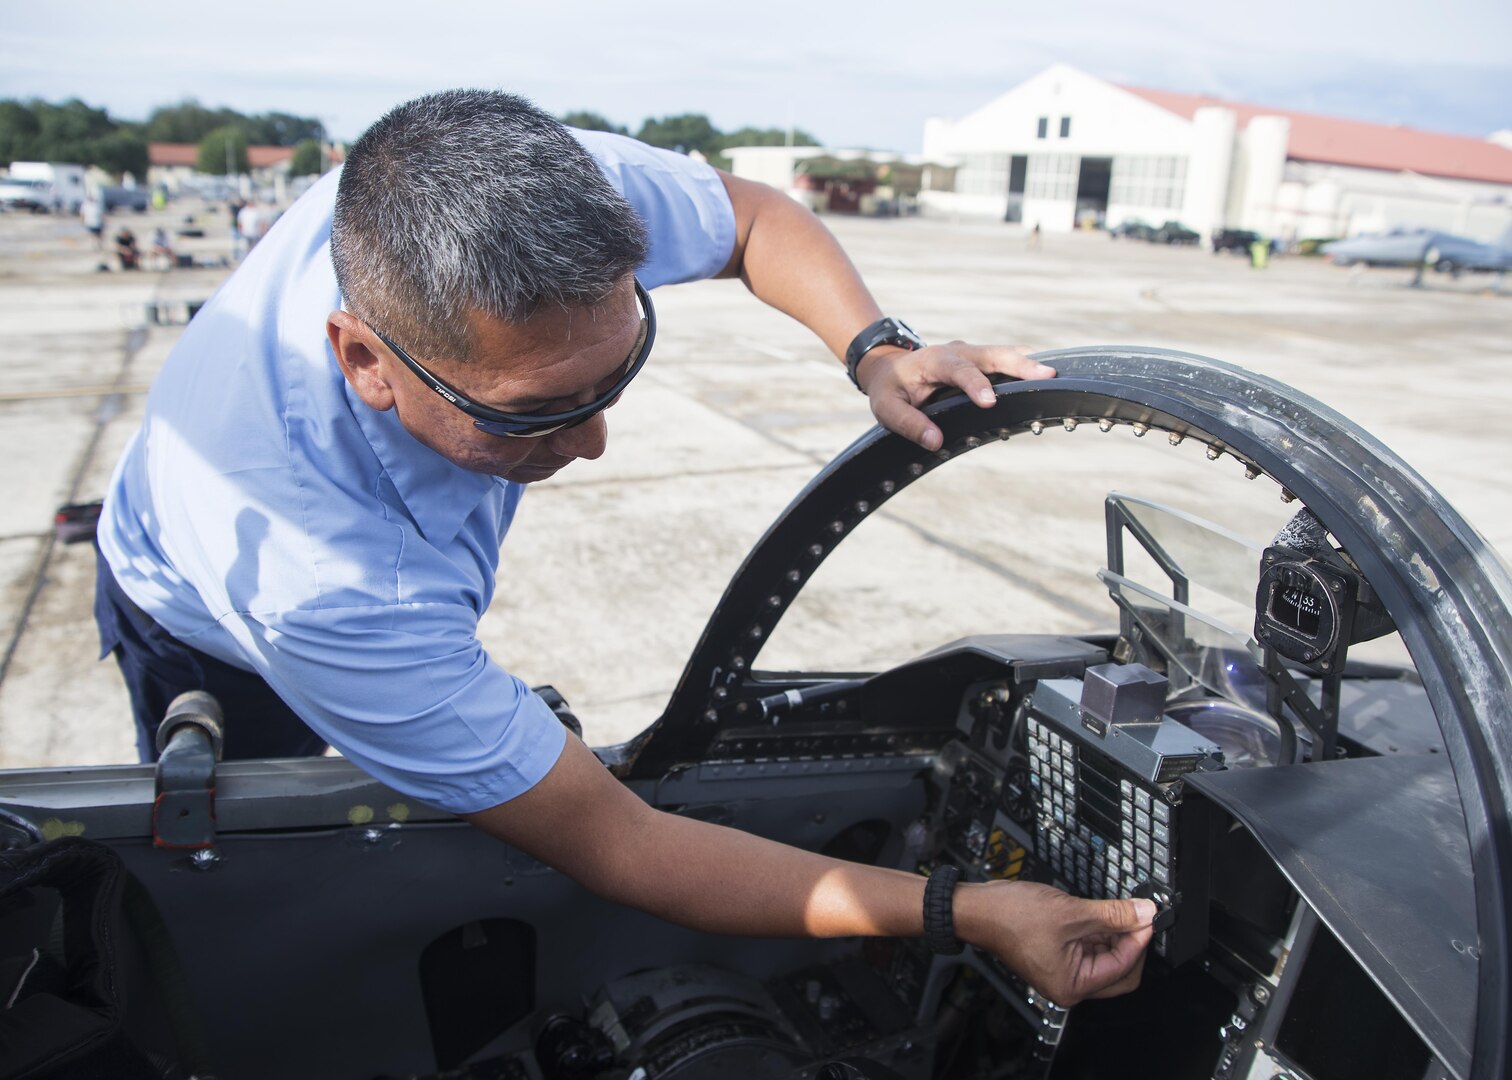 Chris Bahe, 12th Flying Training Wing T-38C Talon II crew chief, tests the switches on a T-38C cockpit during a pre-flight inspection at Joint Base San Antonio-Randolph Nov. 8, 2016. Bahe performs a walk-around inspection before and after every flight. (U.S. Air Force photo by Airman 1st Class Lauren Ely/Released)